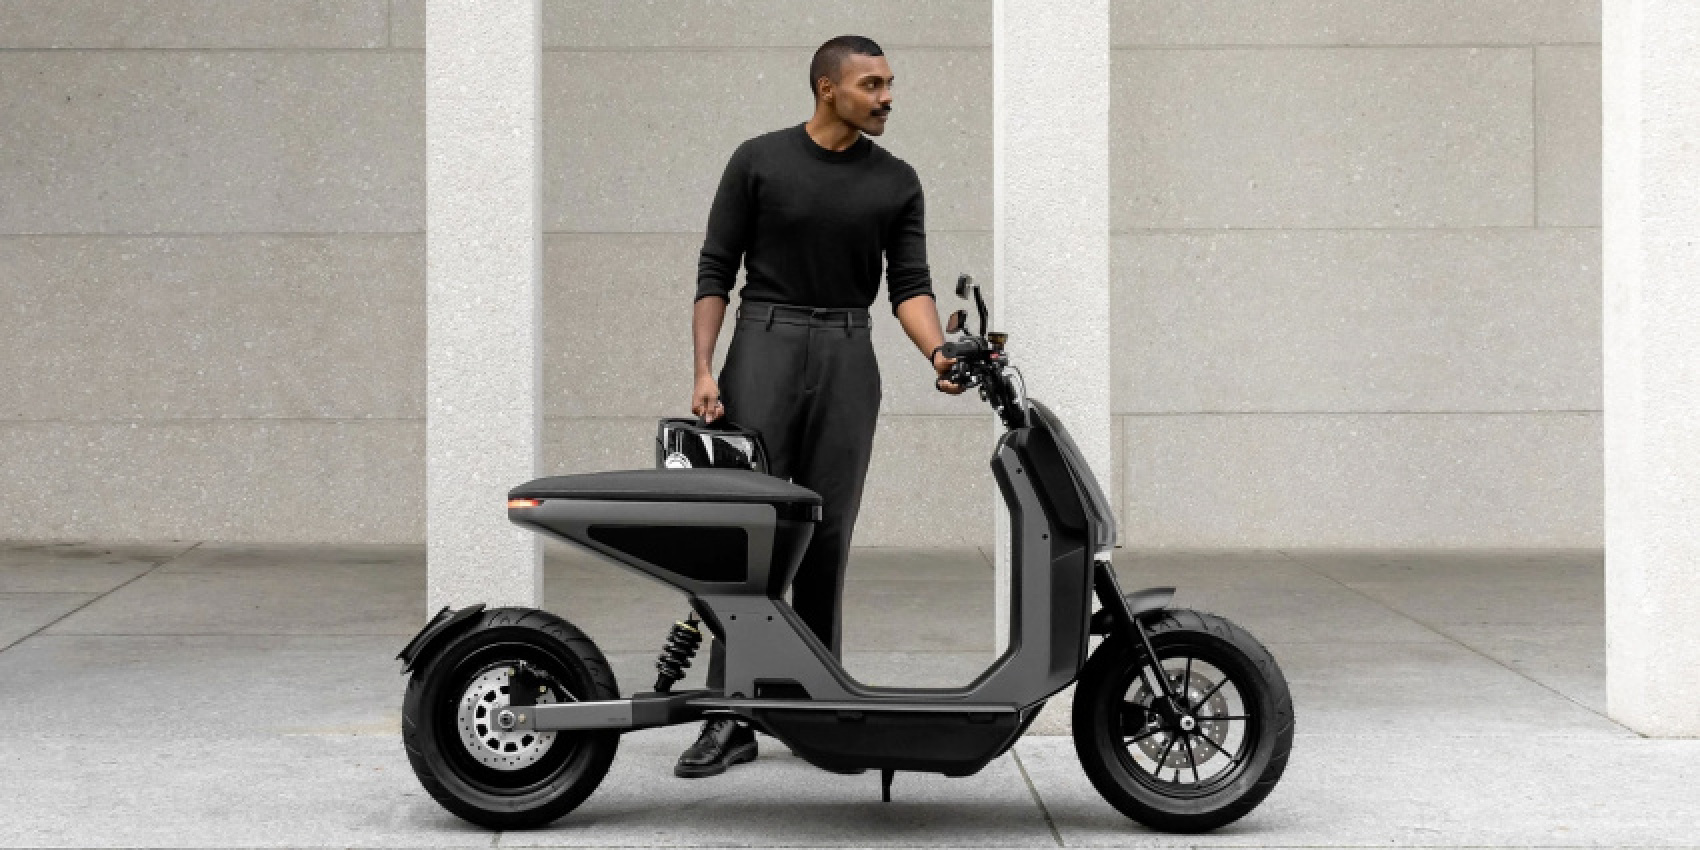 autos, cars, new high-speed german electric scooter offers modern styling, breaks from competitors